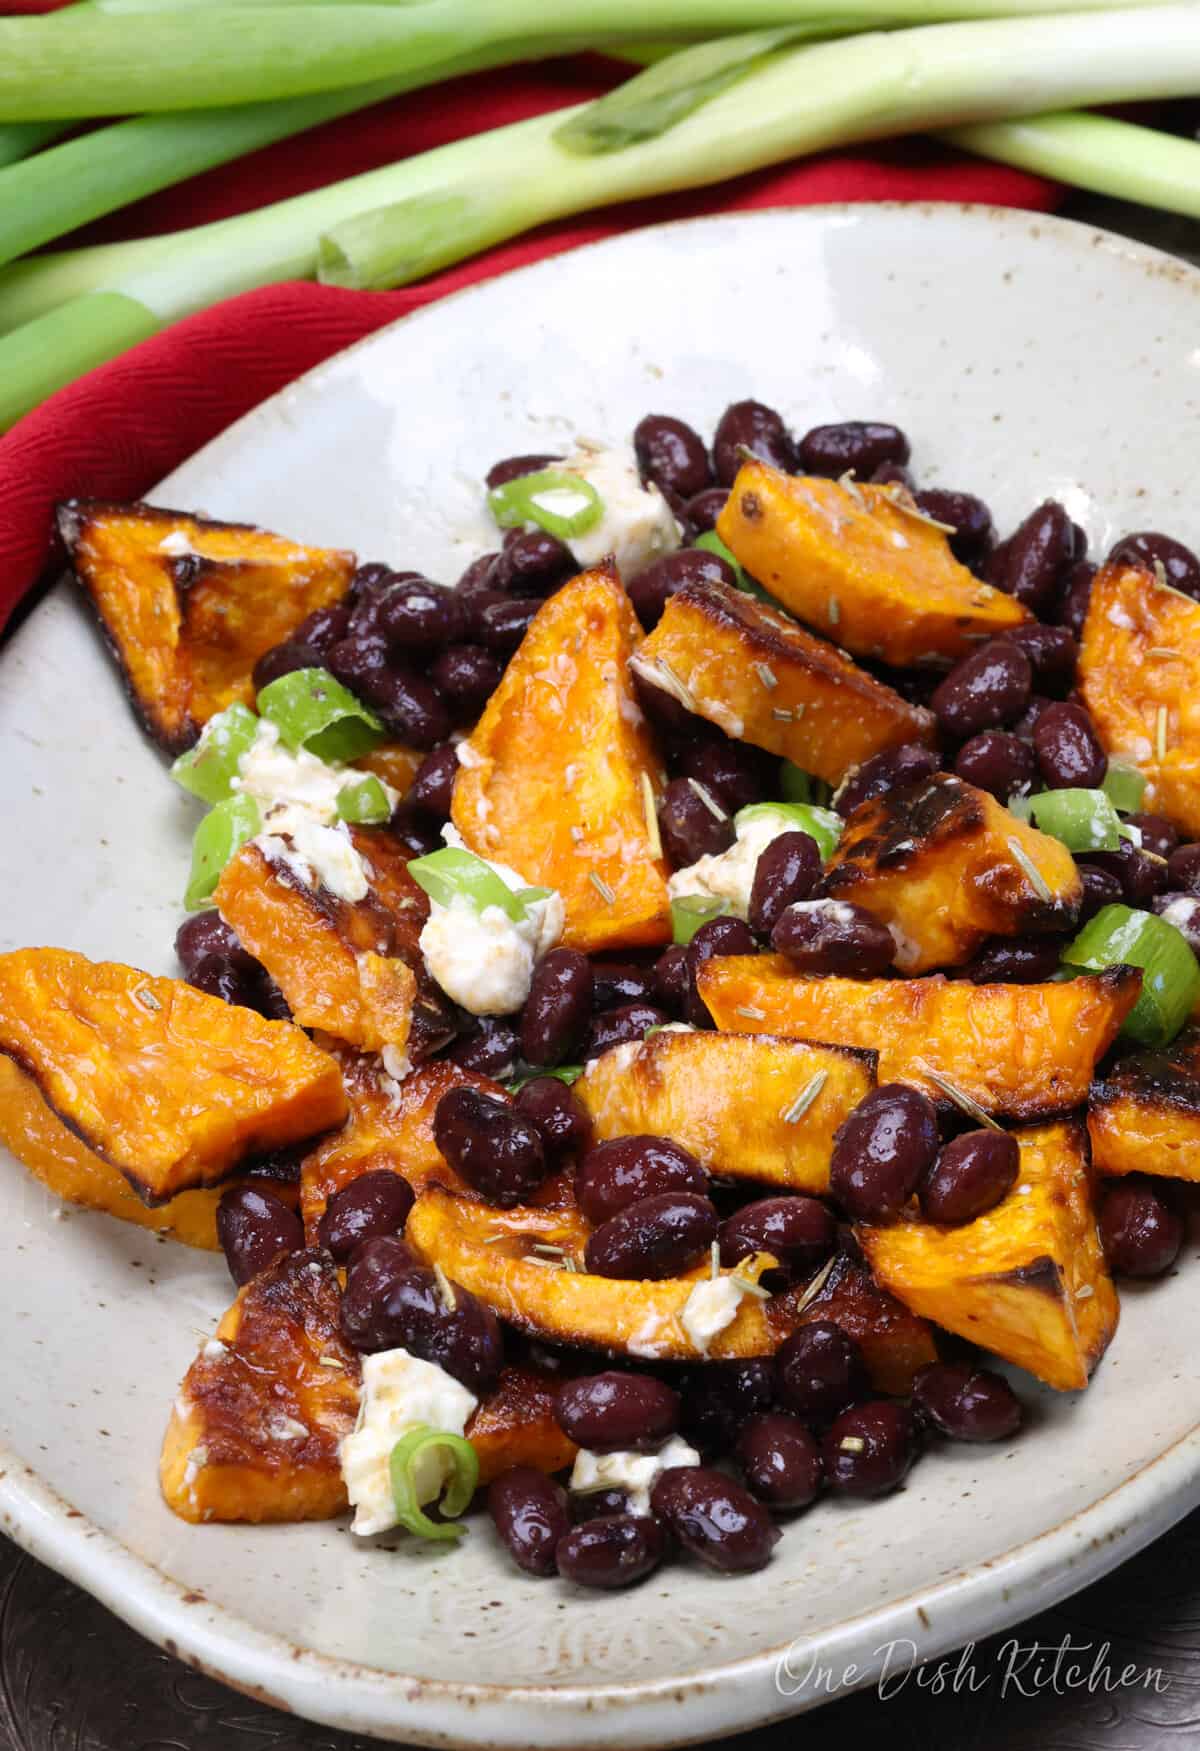 roasted sweet potatoes and black beans topped with crumbled goat cheese on a white plate next to a red napkin.